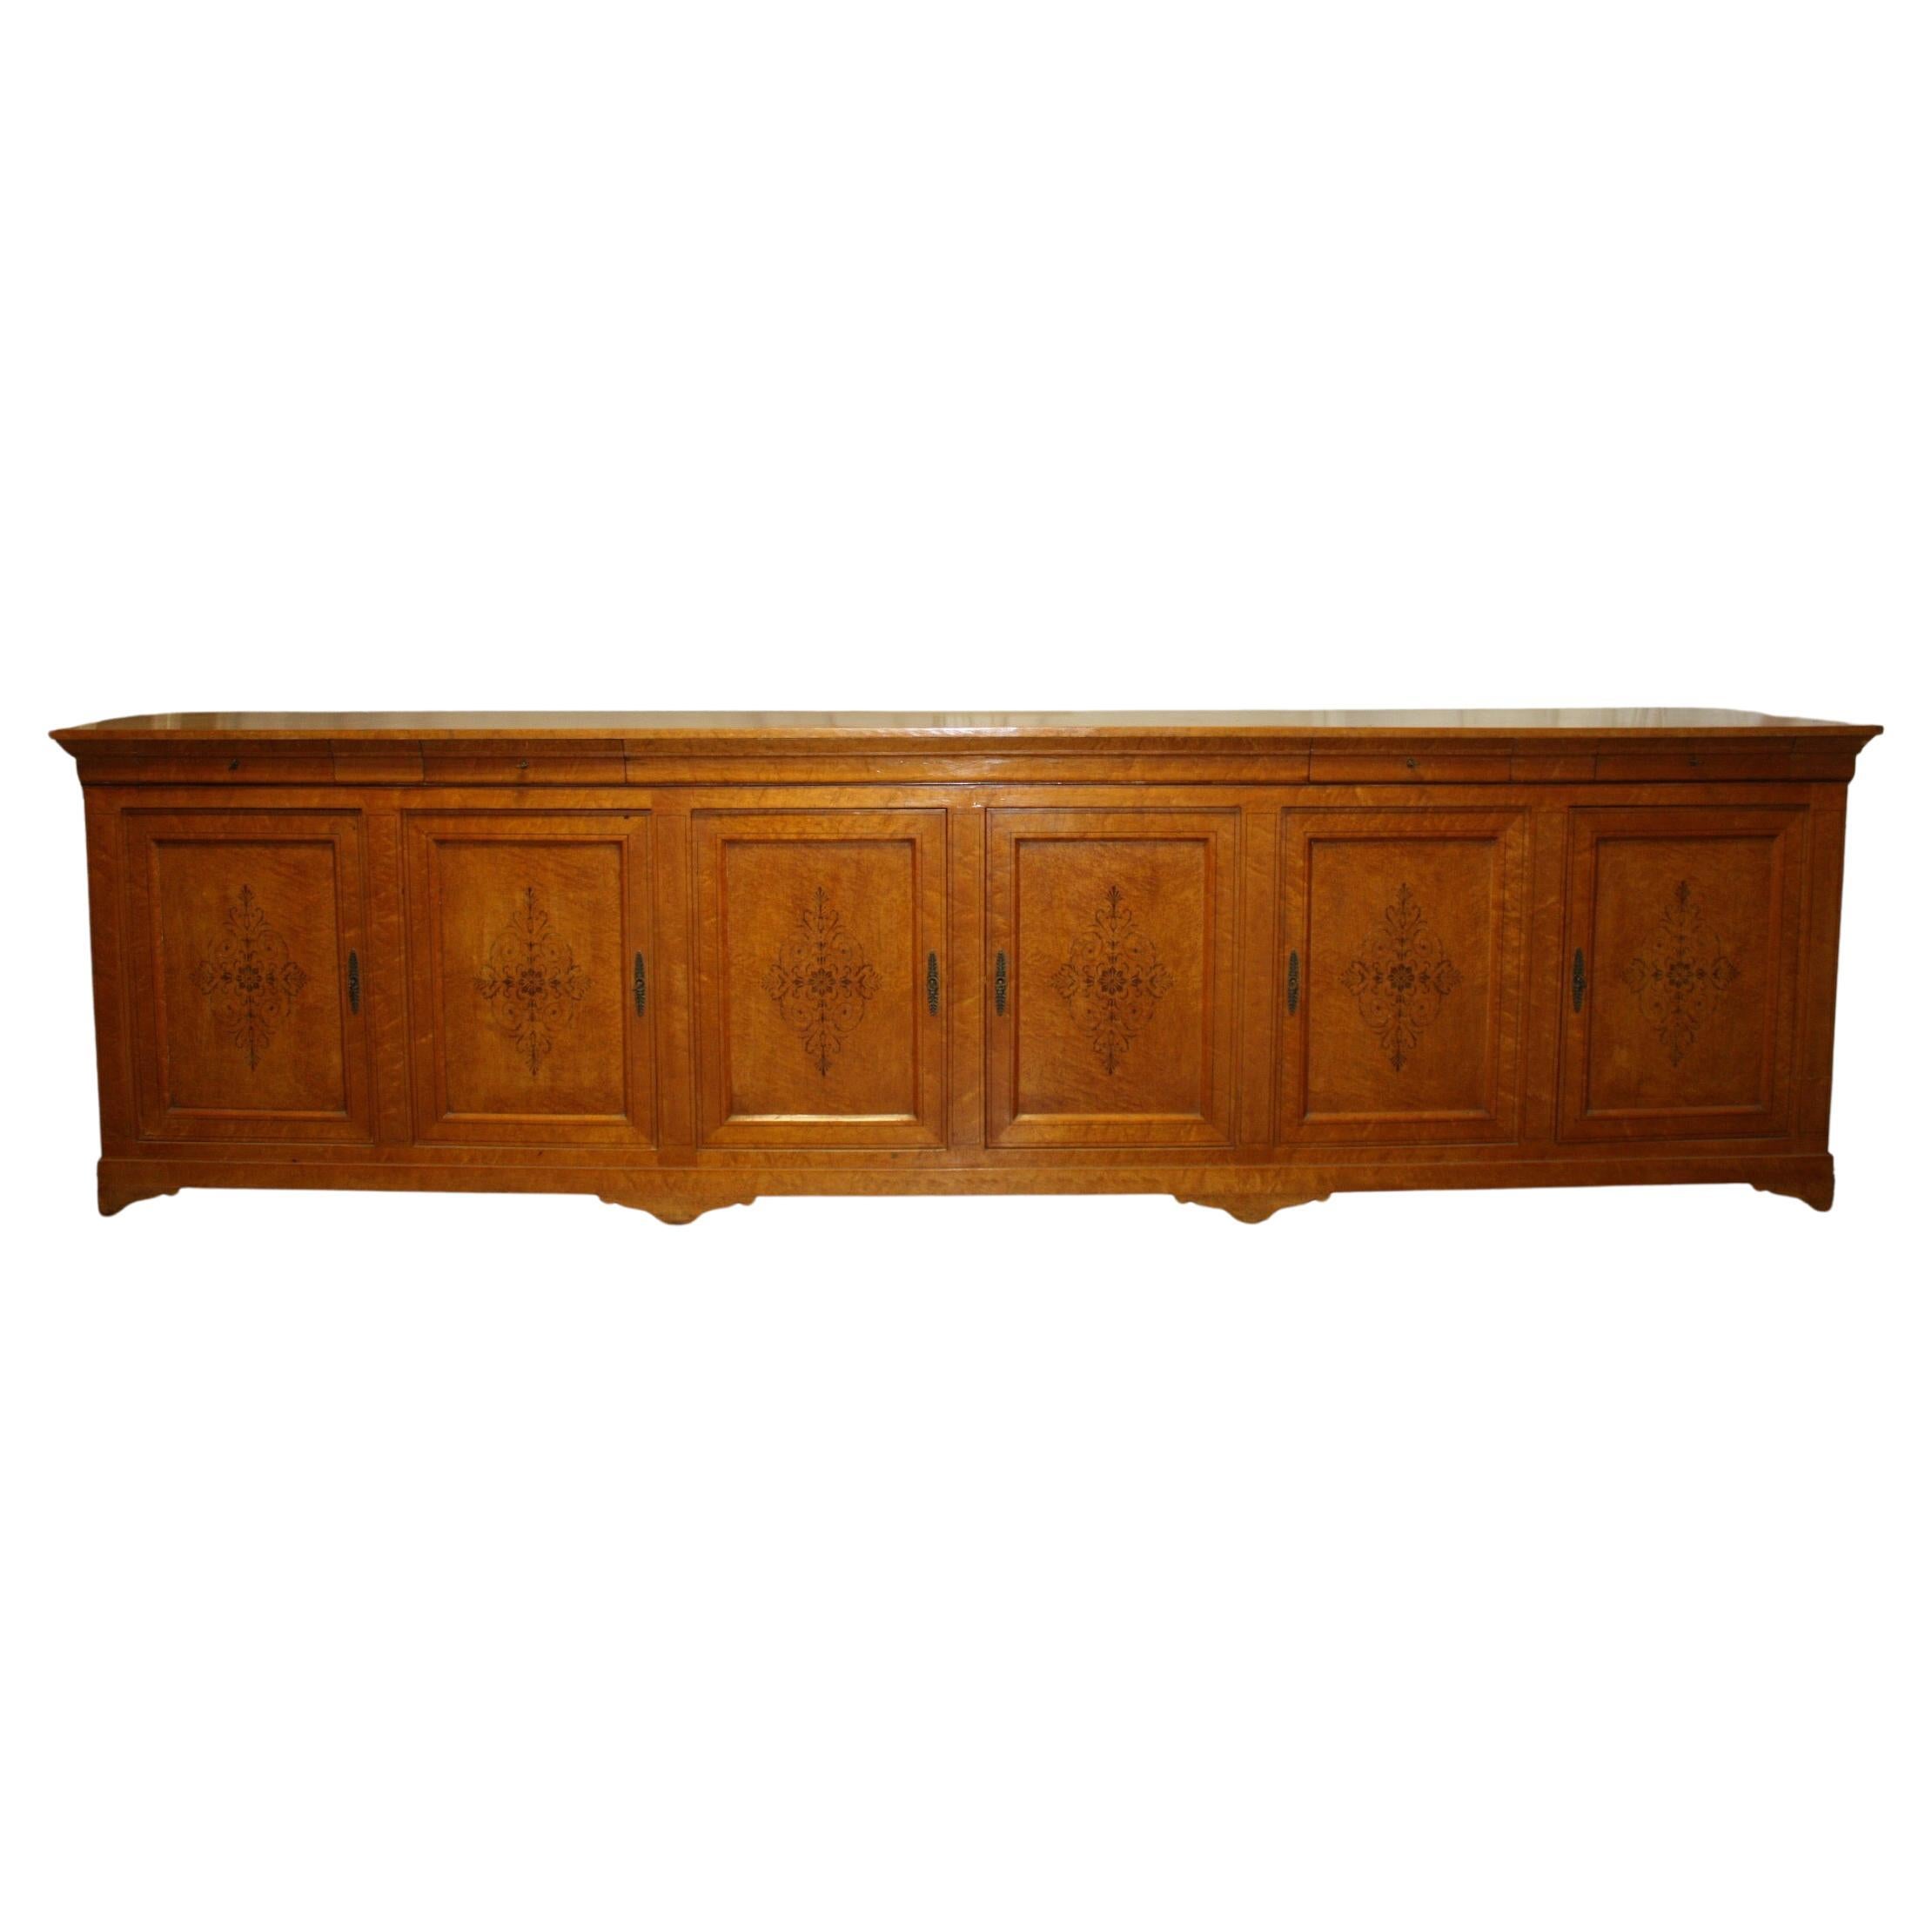 Early 19th Century French Charles X Sideboard For Sale